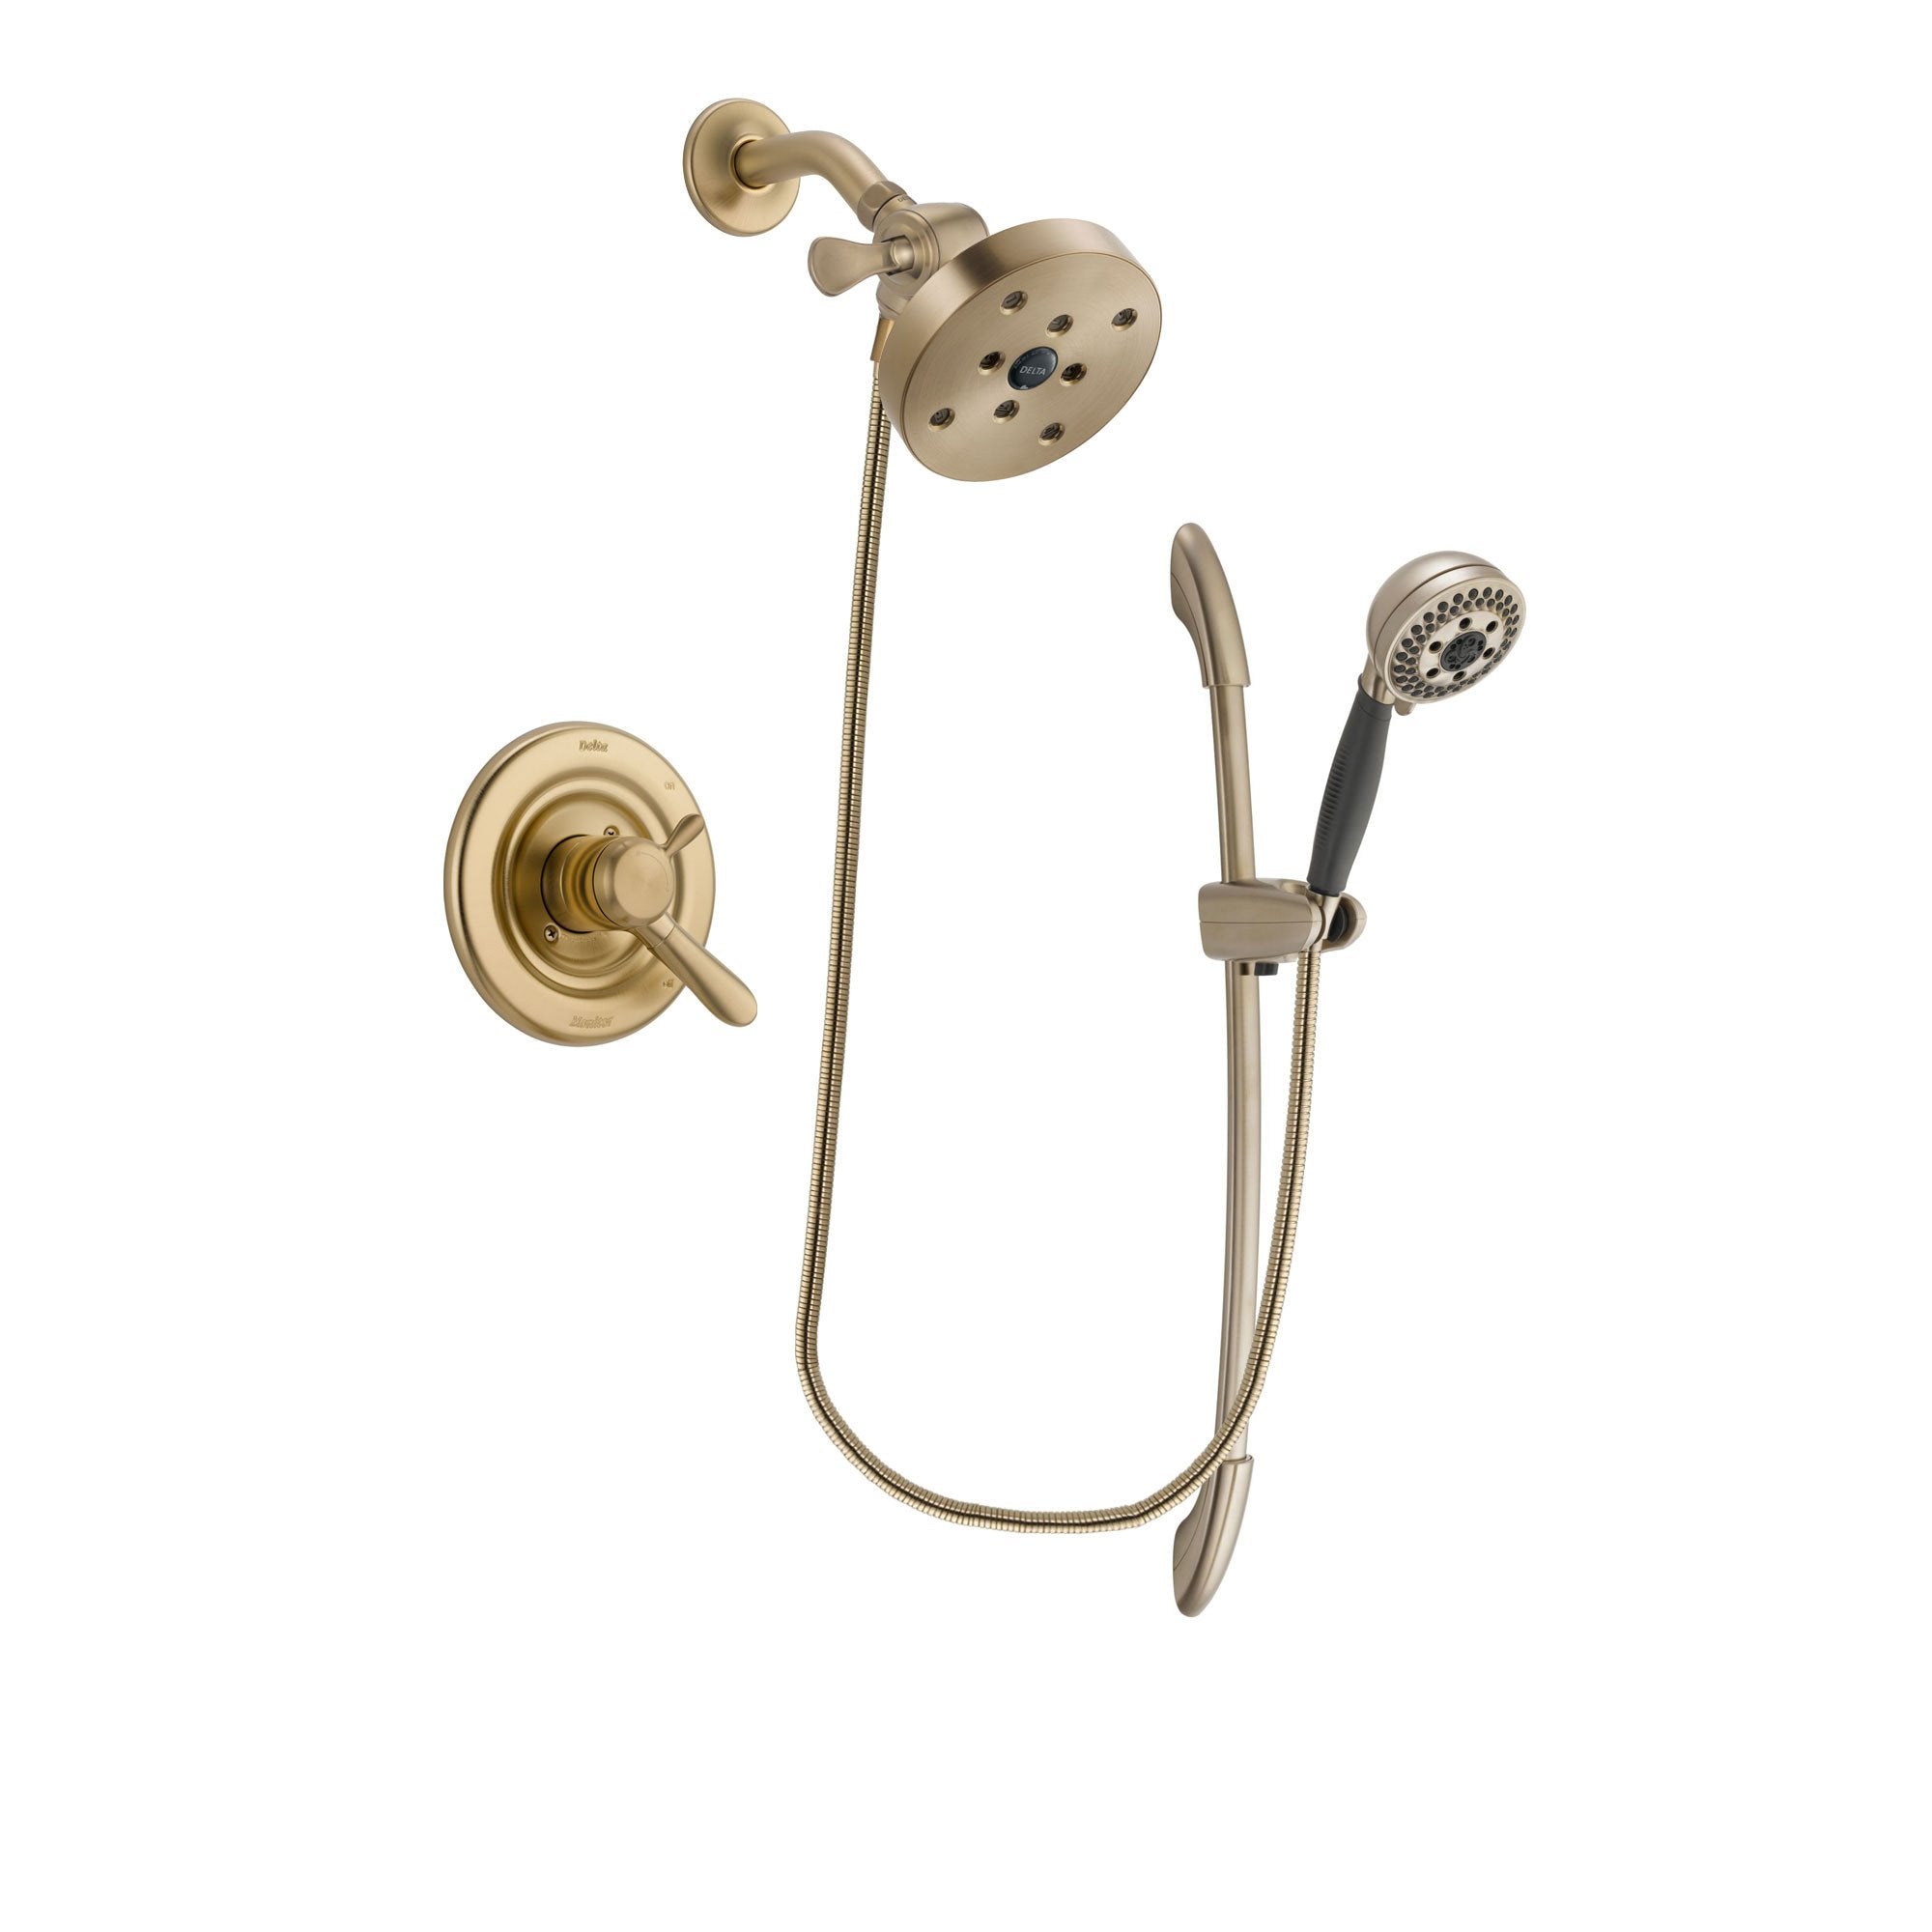 Delta Lahara Champagne Bronze Finish Dual Control Shower Faucet System Package with 5-1/2 inch Showerhead and 5-Spray Handshower with Slide Bar Includes Rough-in Valve DSP3412V